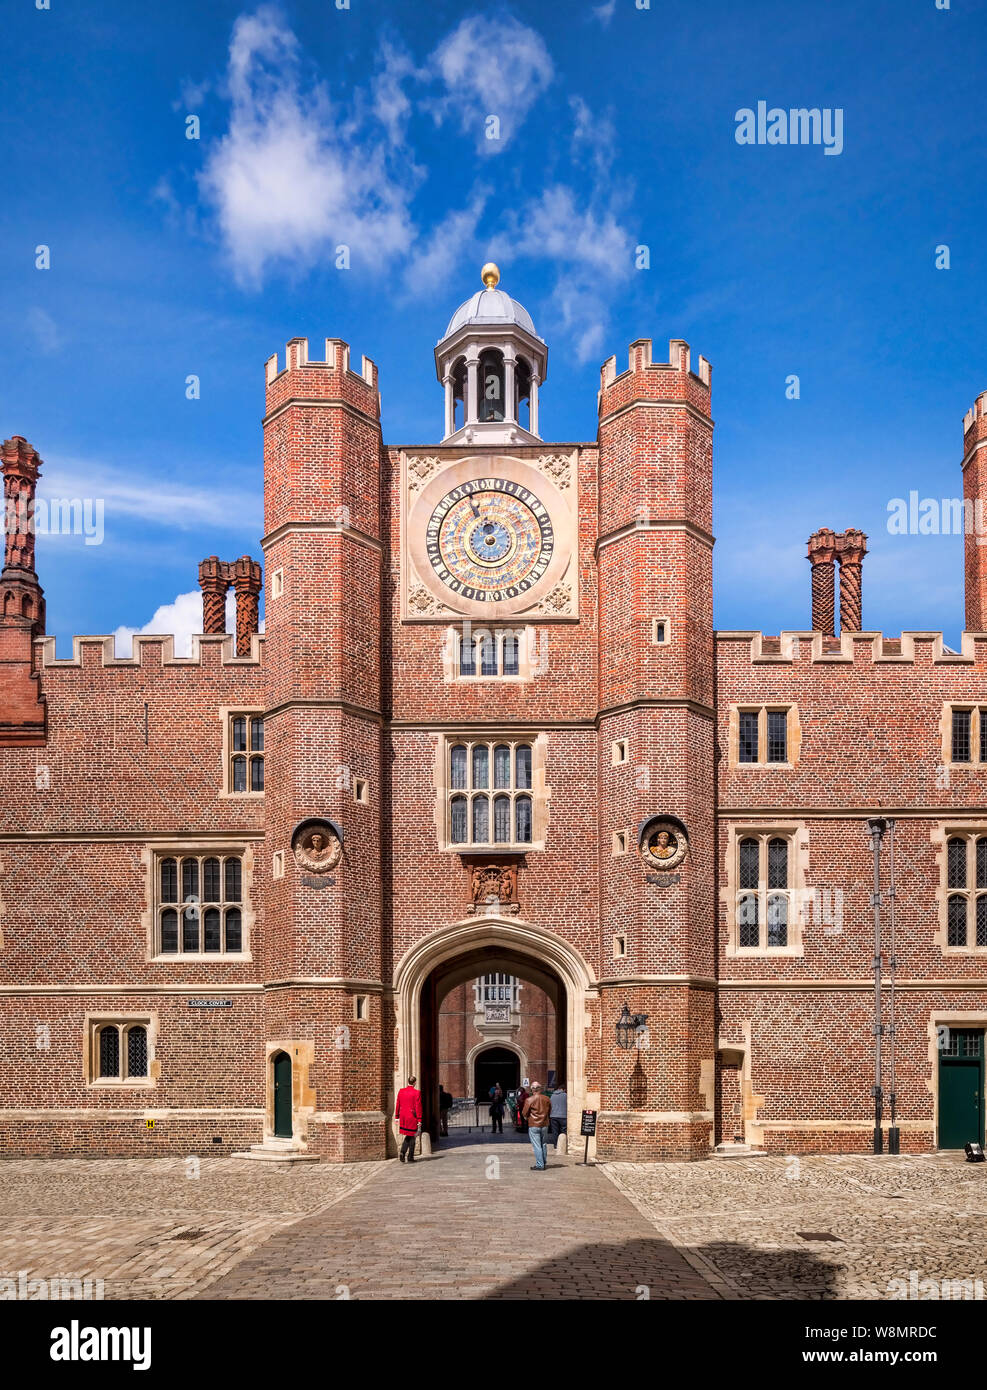 9 June 2019: Richmond upon Thames, London, UK - Anne Boleyn's Gate, the gatehouse of the Clock Court in Hampton Court Palace, the former royal residen Stock Photo